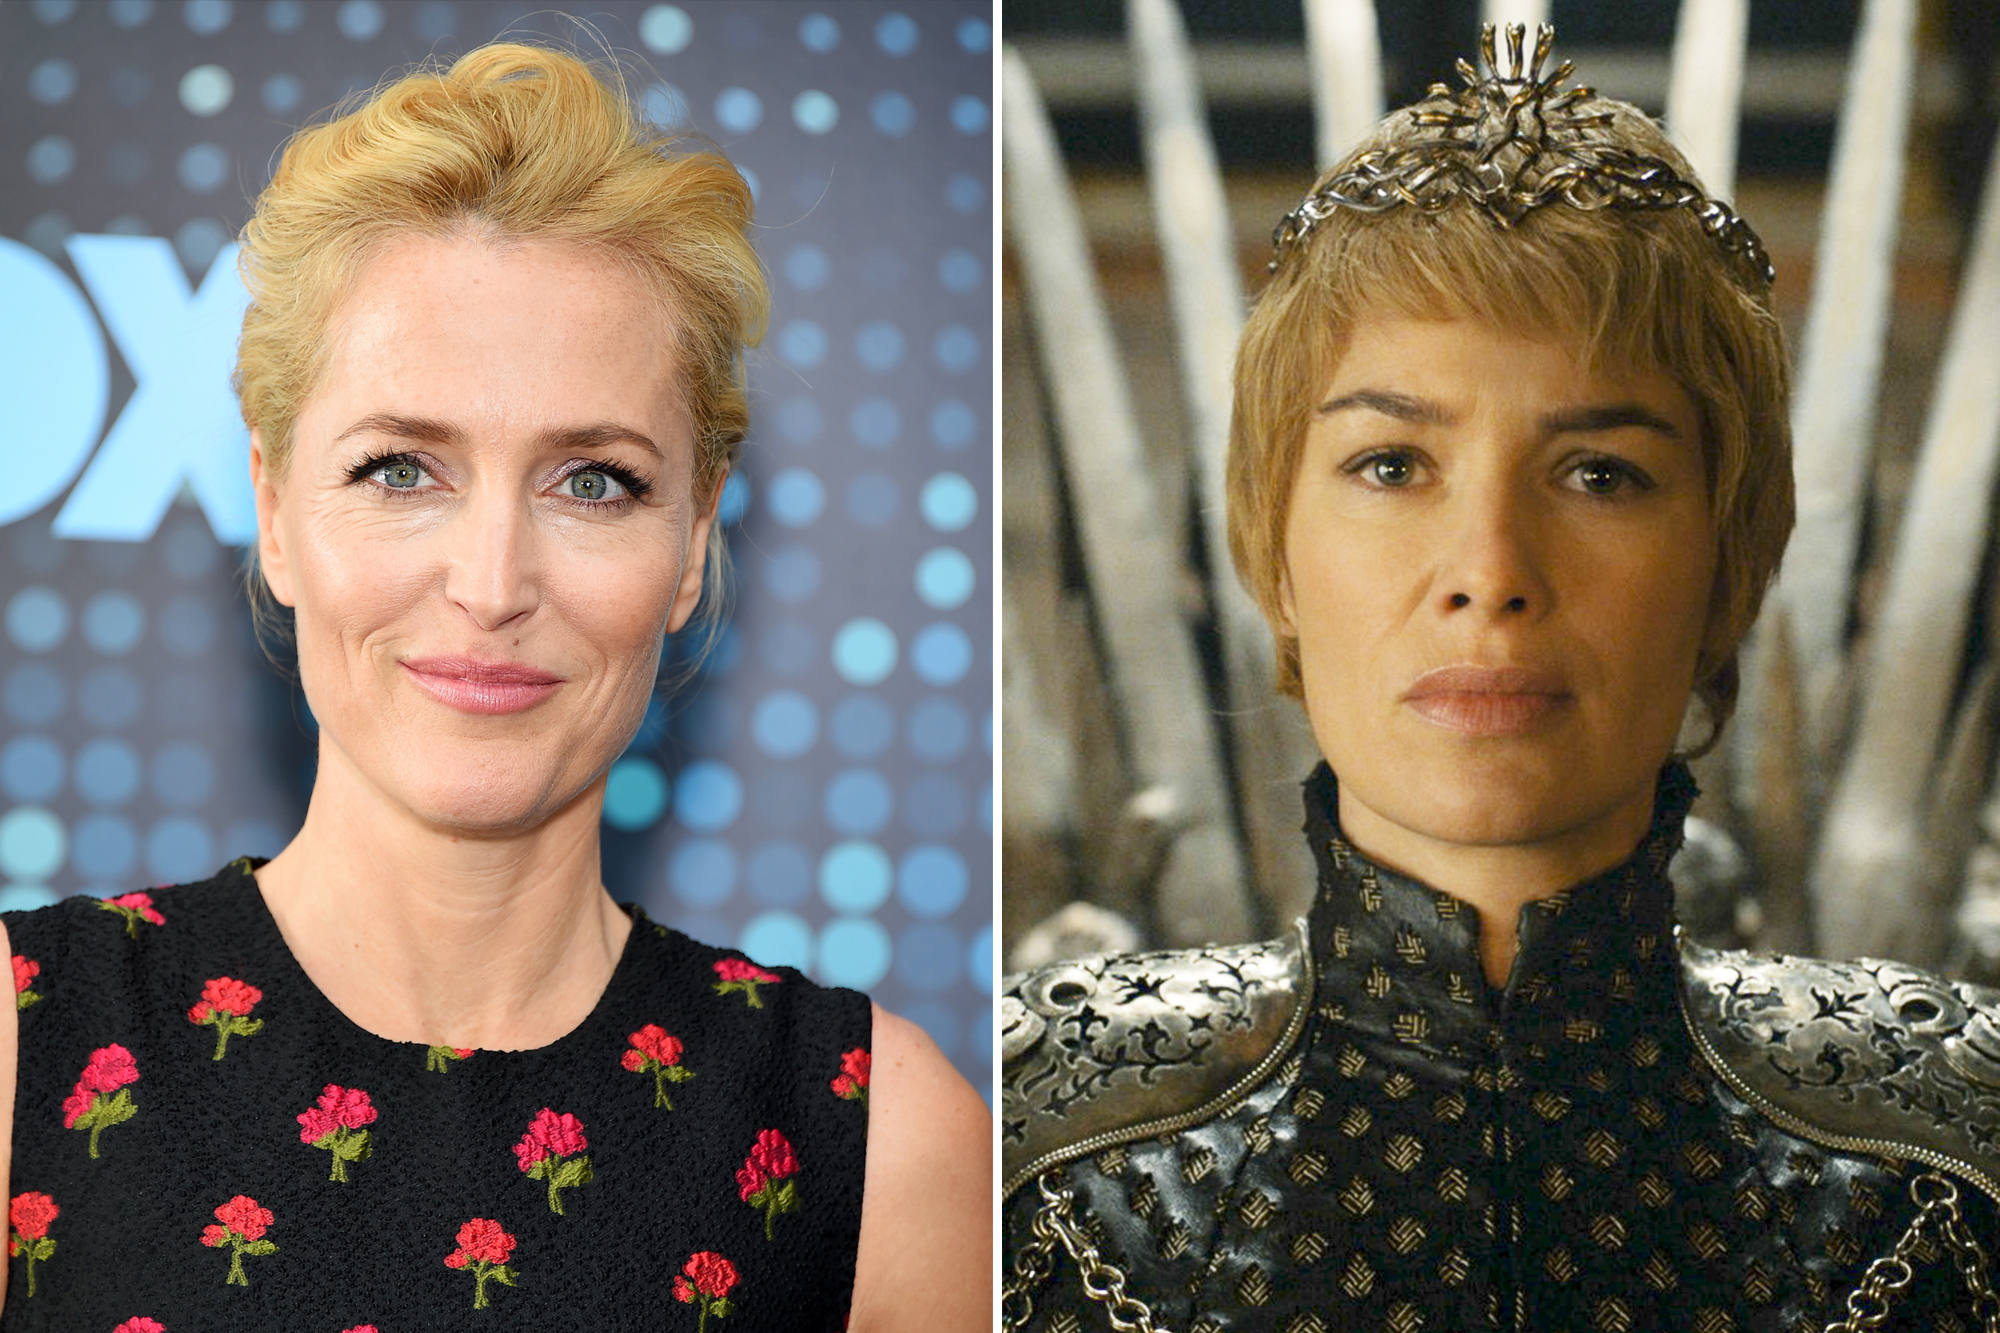 Game Of Thrones 13 Actors Who Were Almost Cast Time Com,Painted Wood Ceiling Ideas